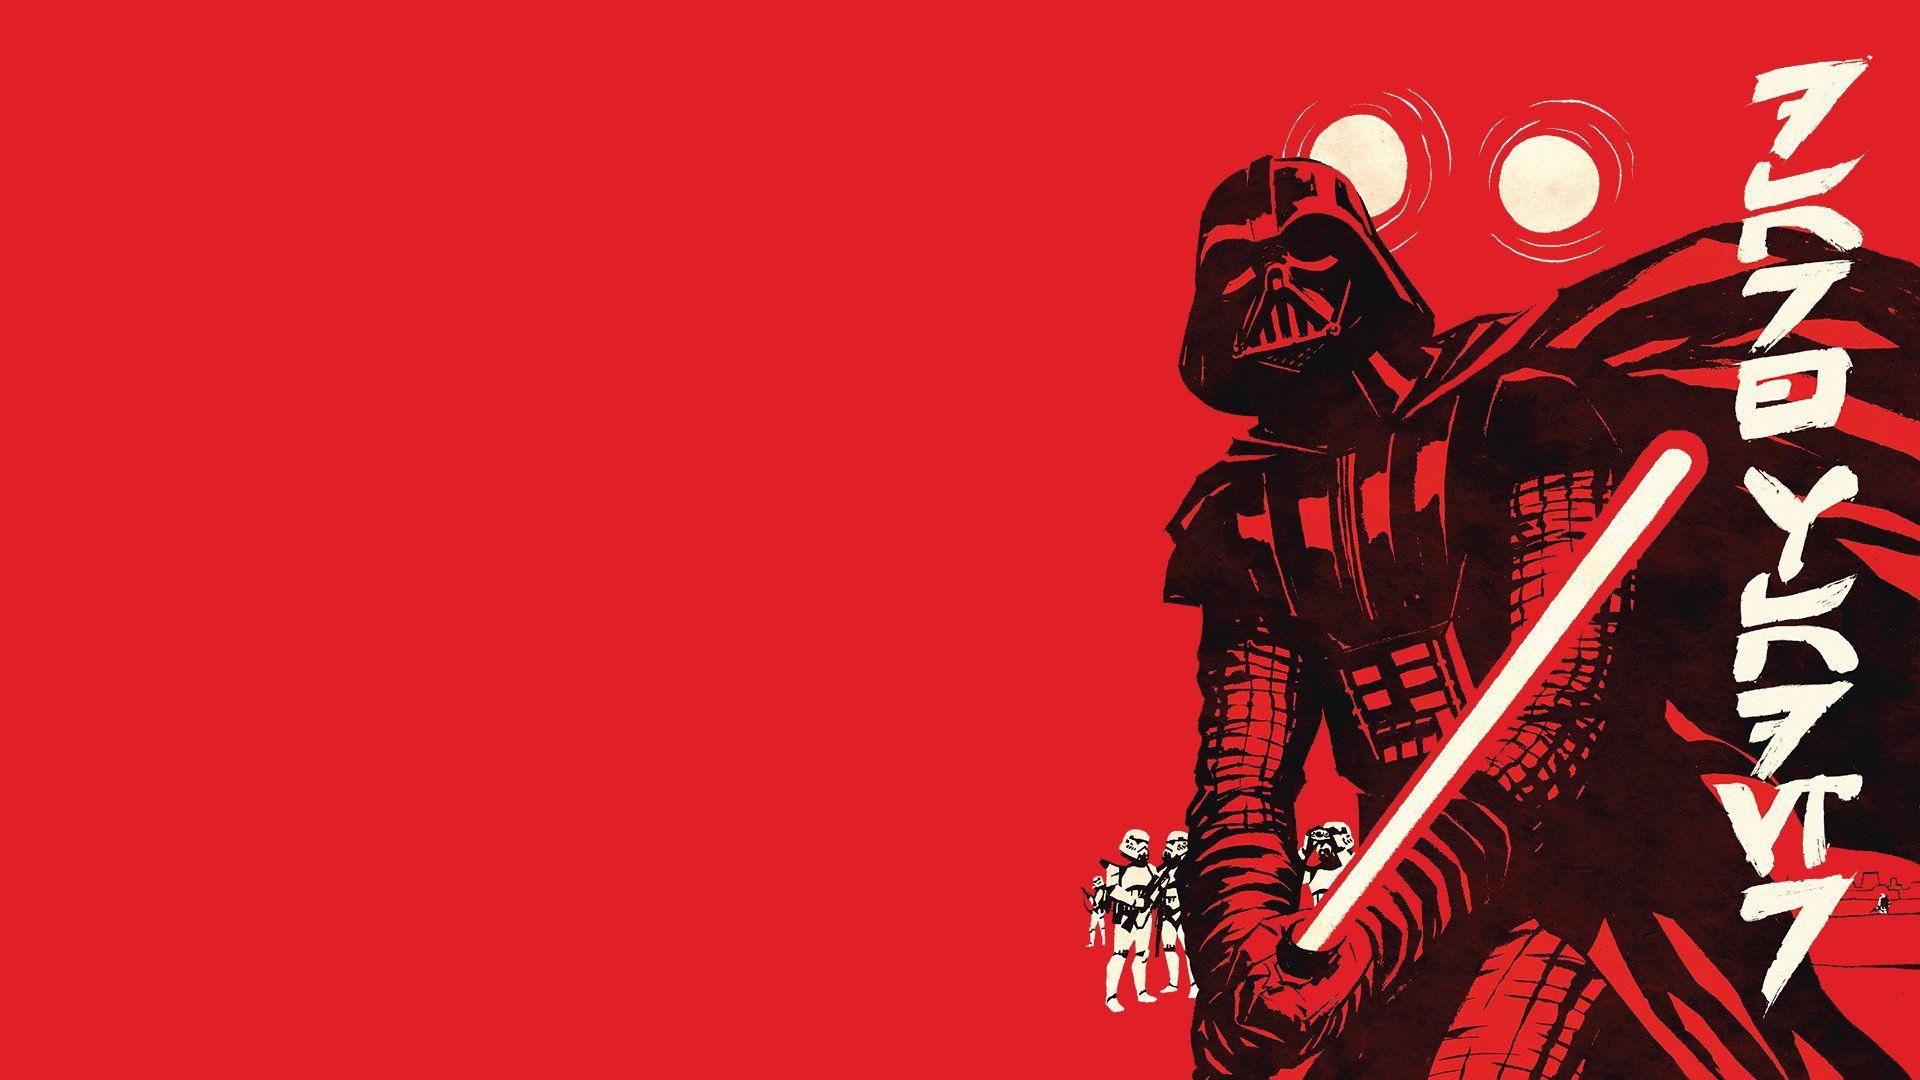 Red And Black Star Wars Wallpapers